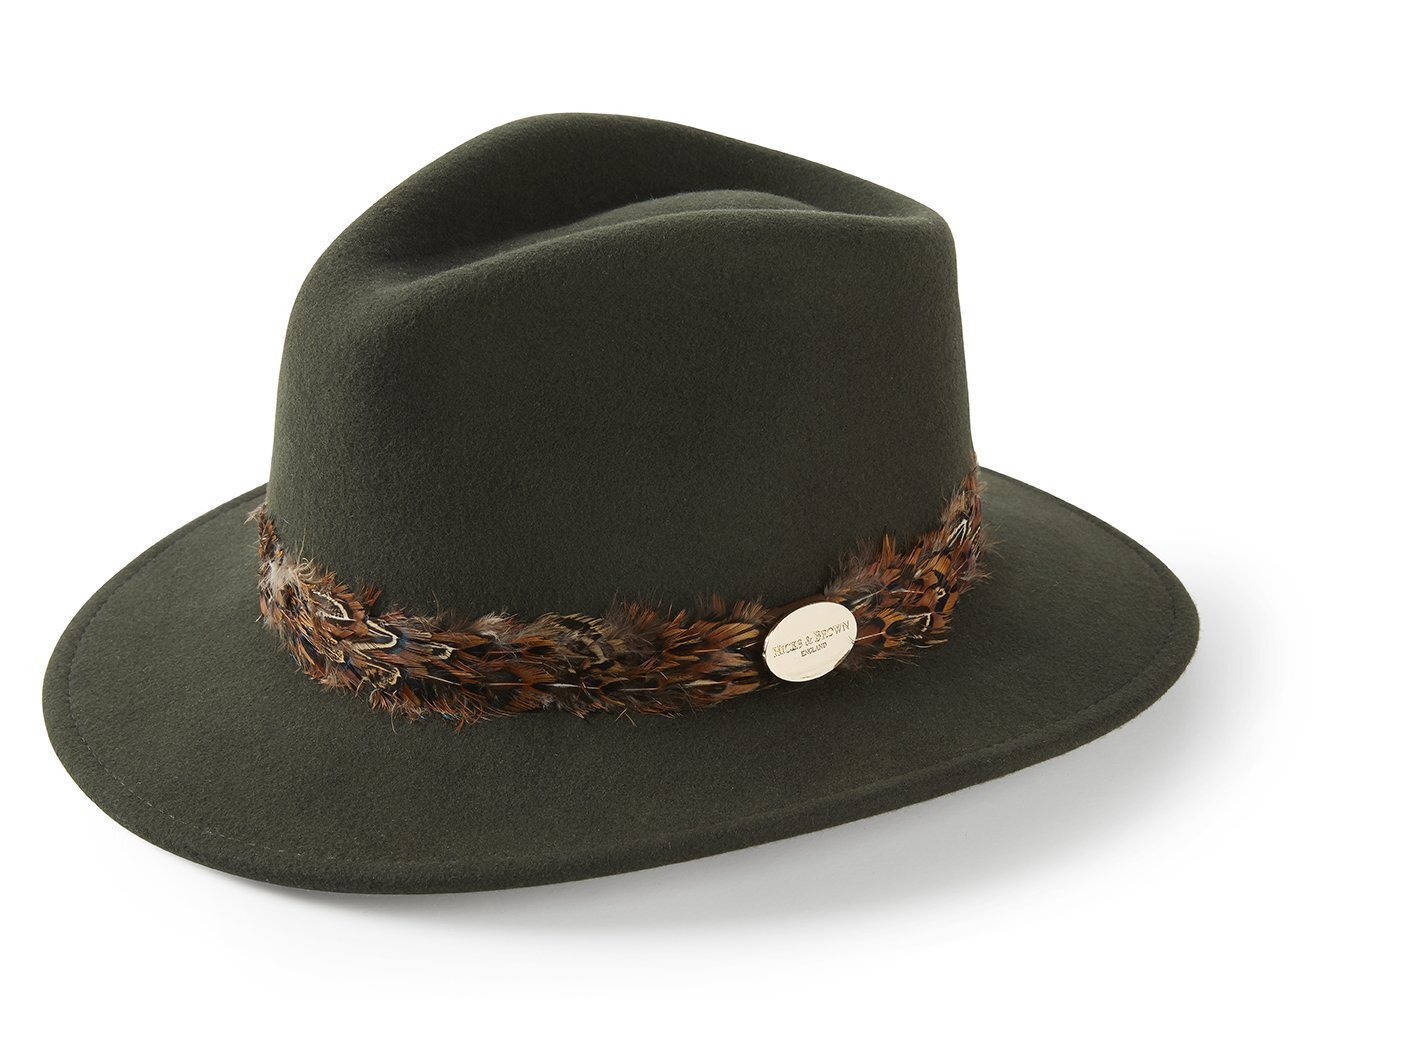 hicks-brown-fedora-the-suffolk-fedora-in-olive-green-pheasant-feather-wrap-green-fedora-hat-ladies-trilby-hats-hicks-brown-13557123022930.jpeg